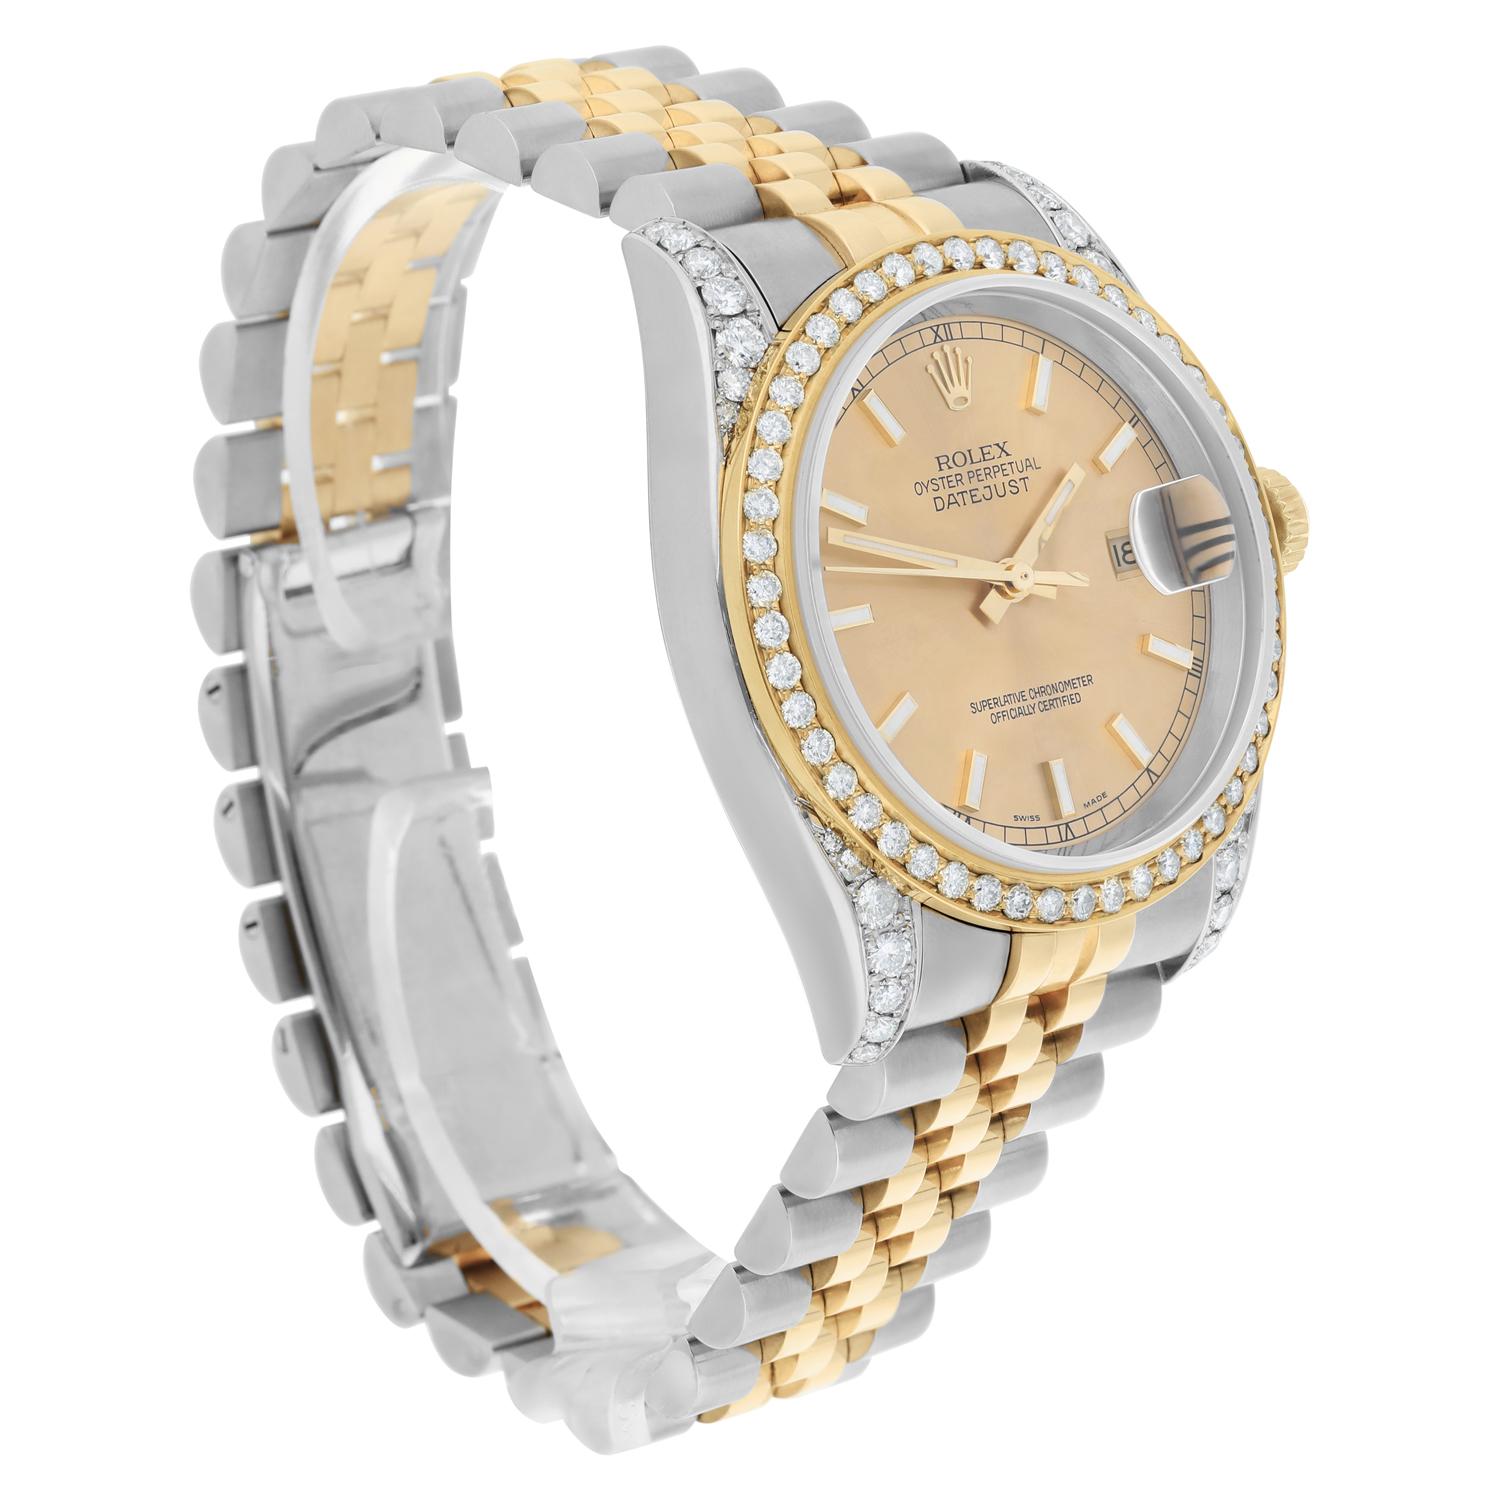 Rolex Datejust 36 Gold & Steel 116233 Champagne Index Dial Diamond Watch For Sale 2